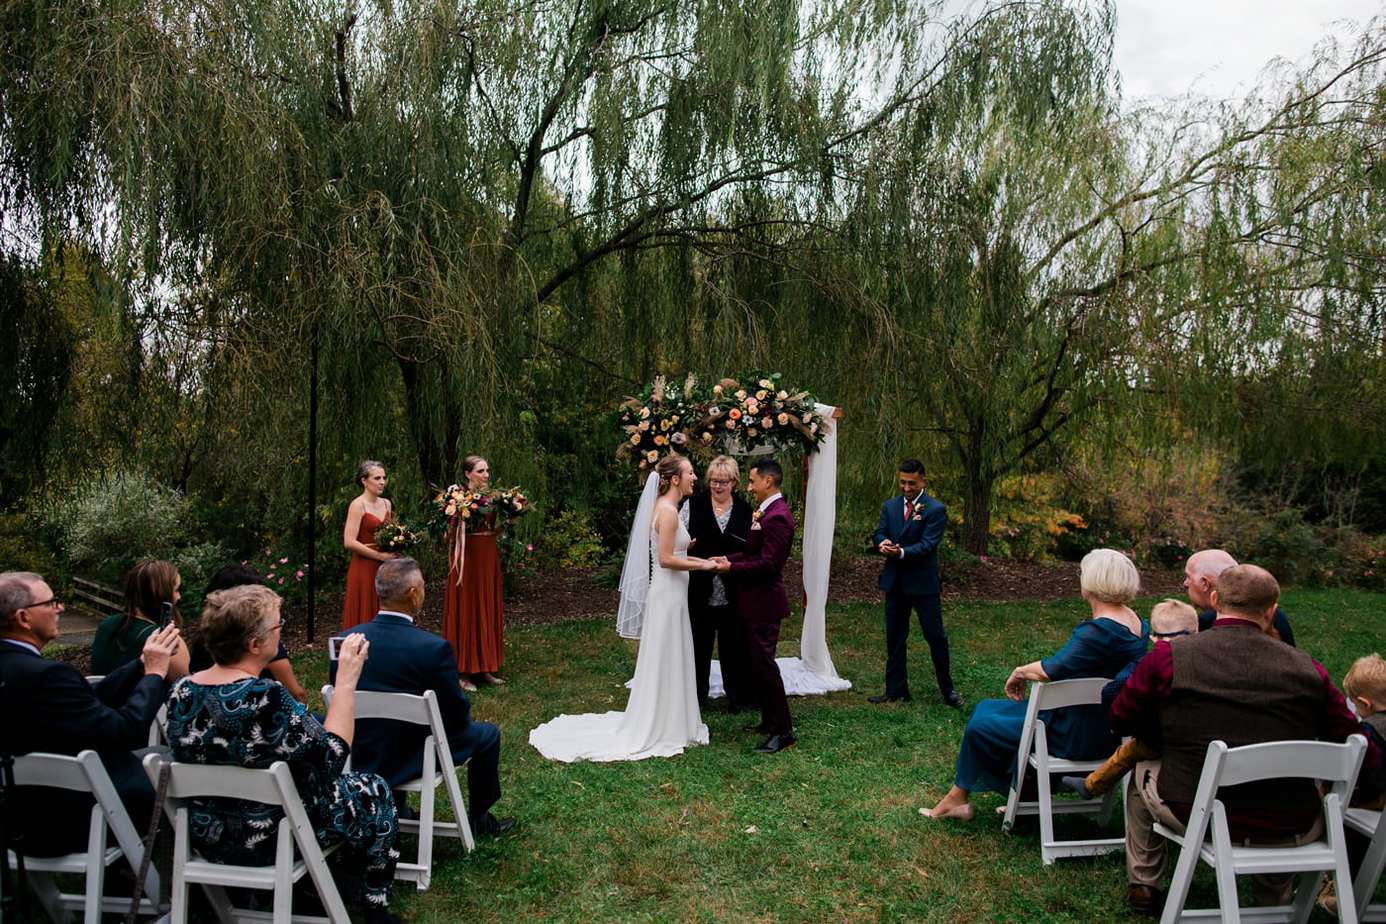 A bride and groom laugh during their wedding ceremony at Clyde Willow Creek Farm. Willow Trees are behind an arbor decorated with flowers and white cloth. Guests are seated in white chairs and there are two bridesmaids and a groomsman.